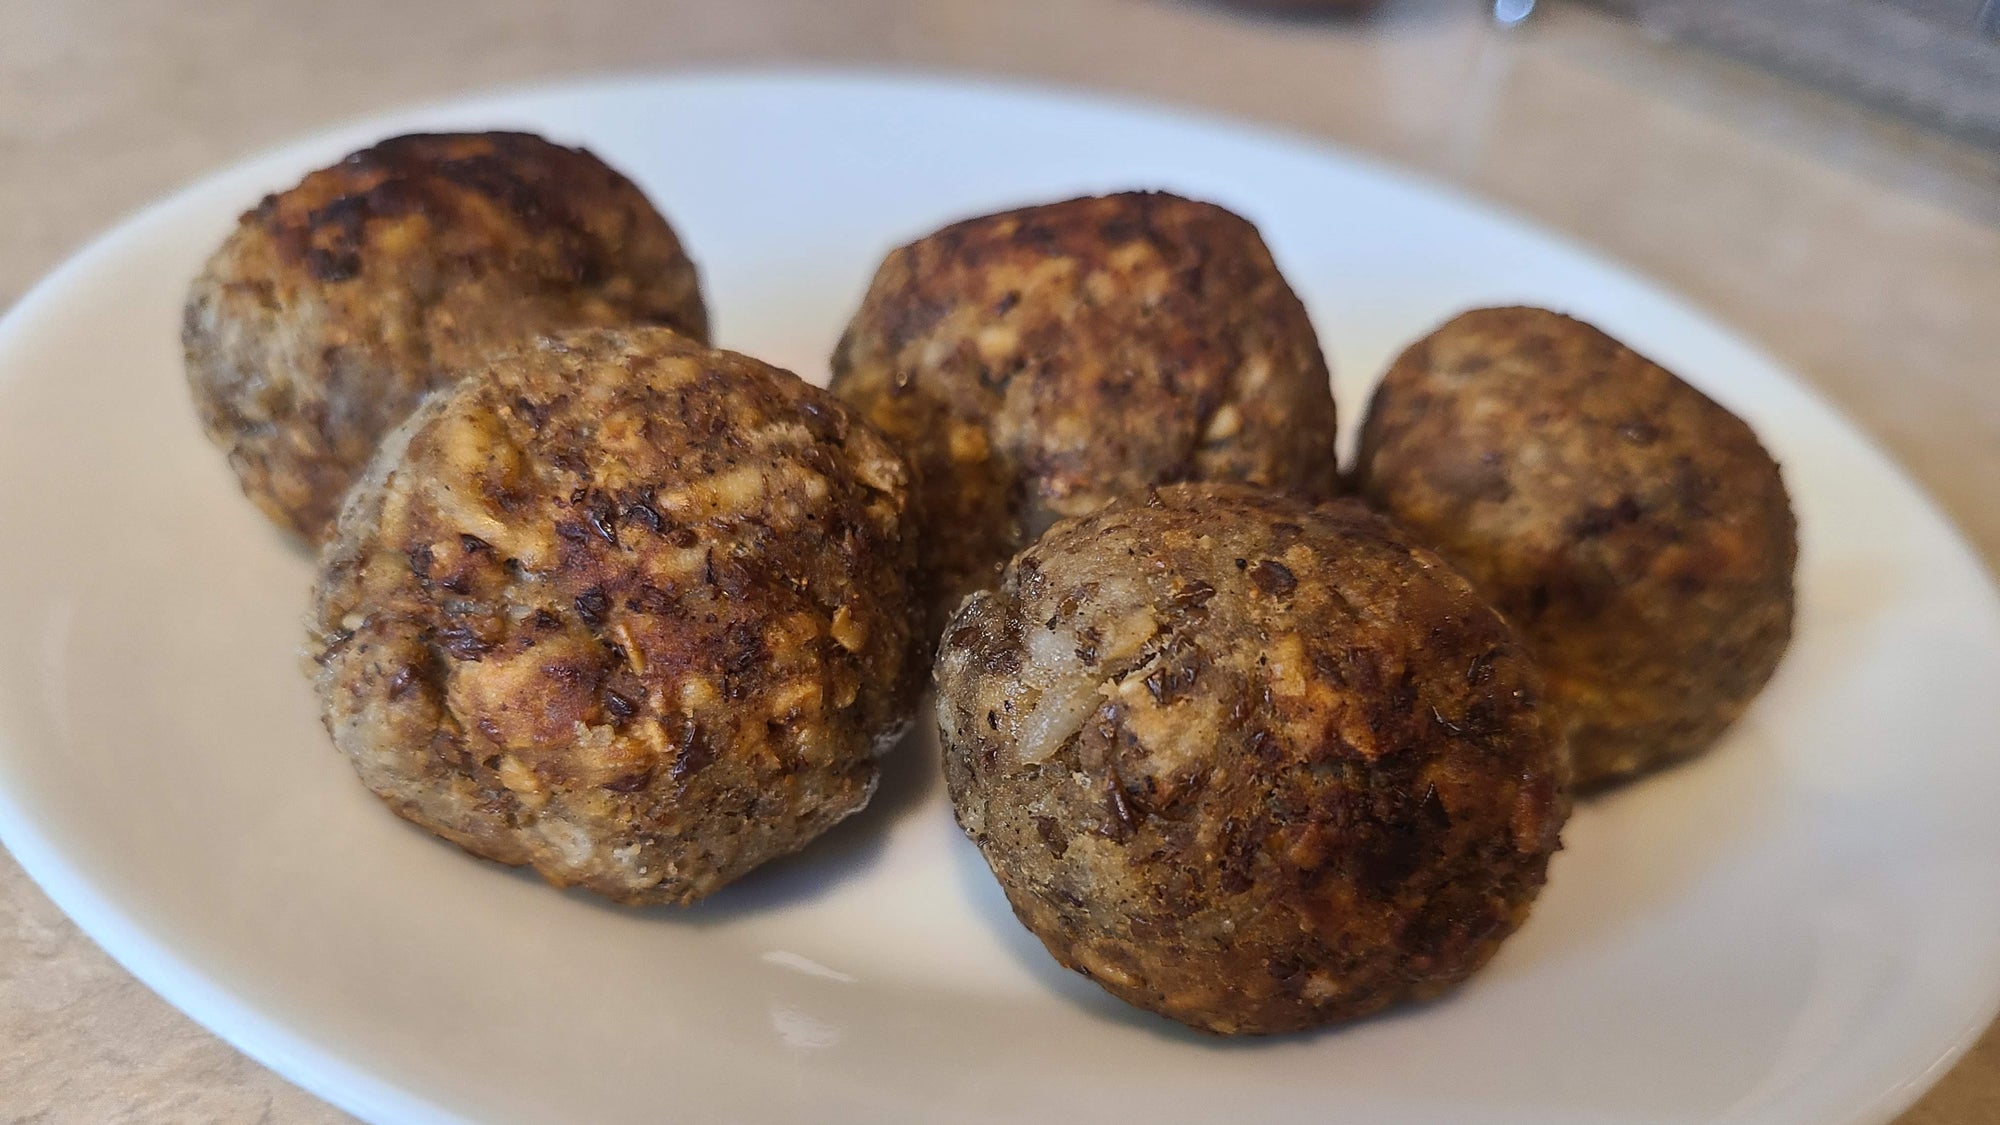 "Meatballs" & "Sausage" made with Lentil Bean Flakes